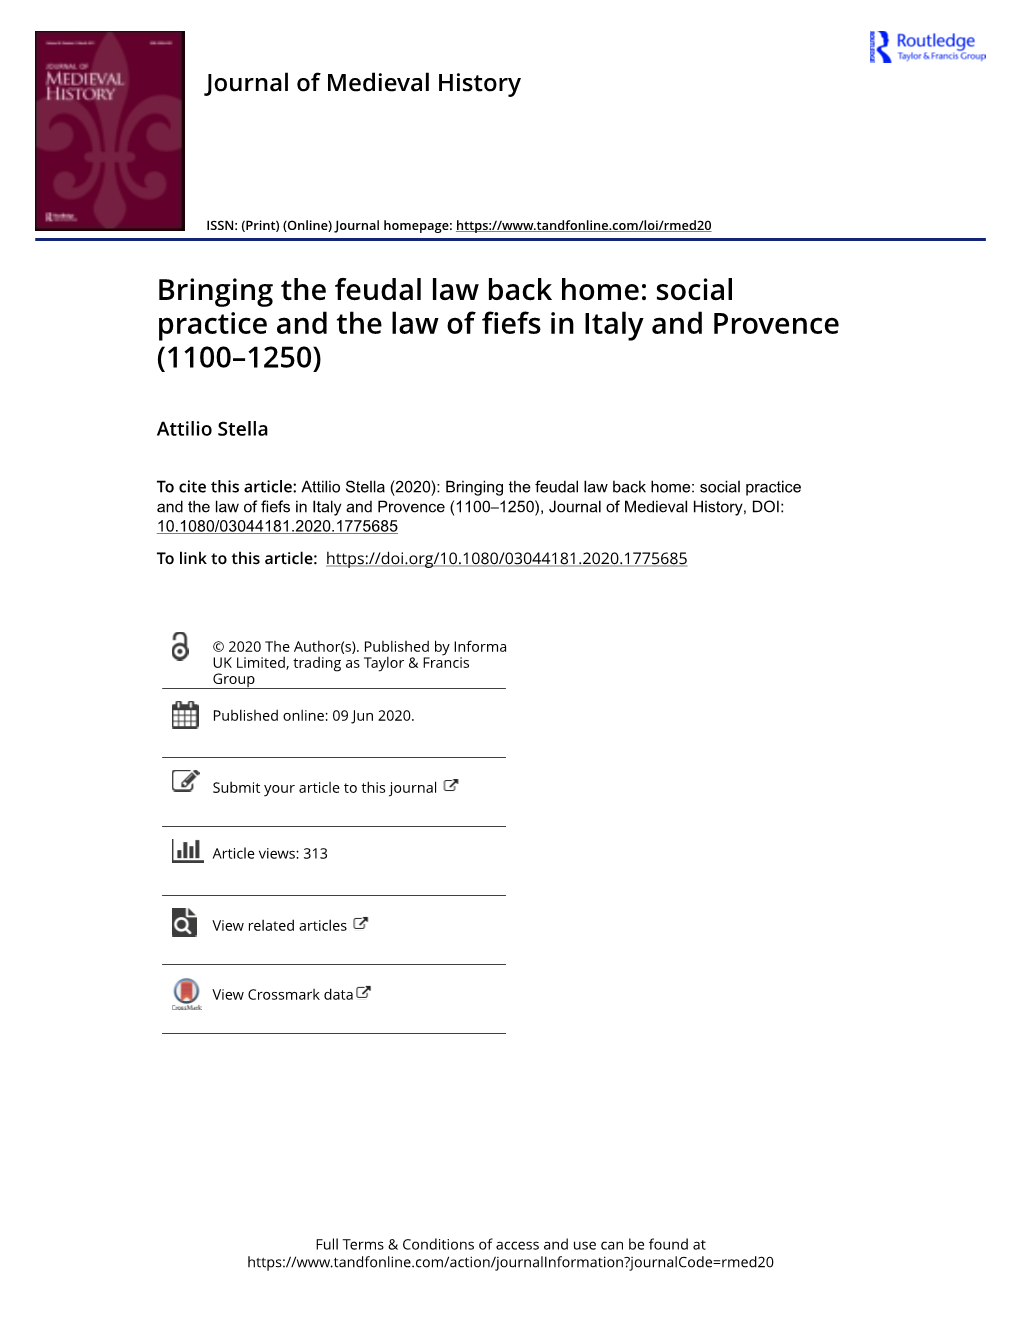 Bringing the Feudal Law Back Home: Social Practice and the Law of Fiefs in Italy and Provence (1100–1250)